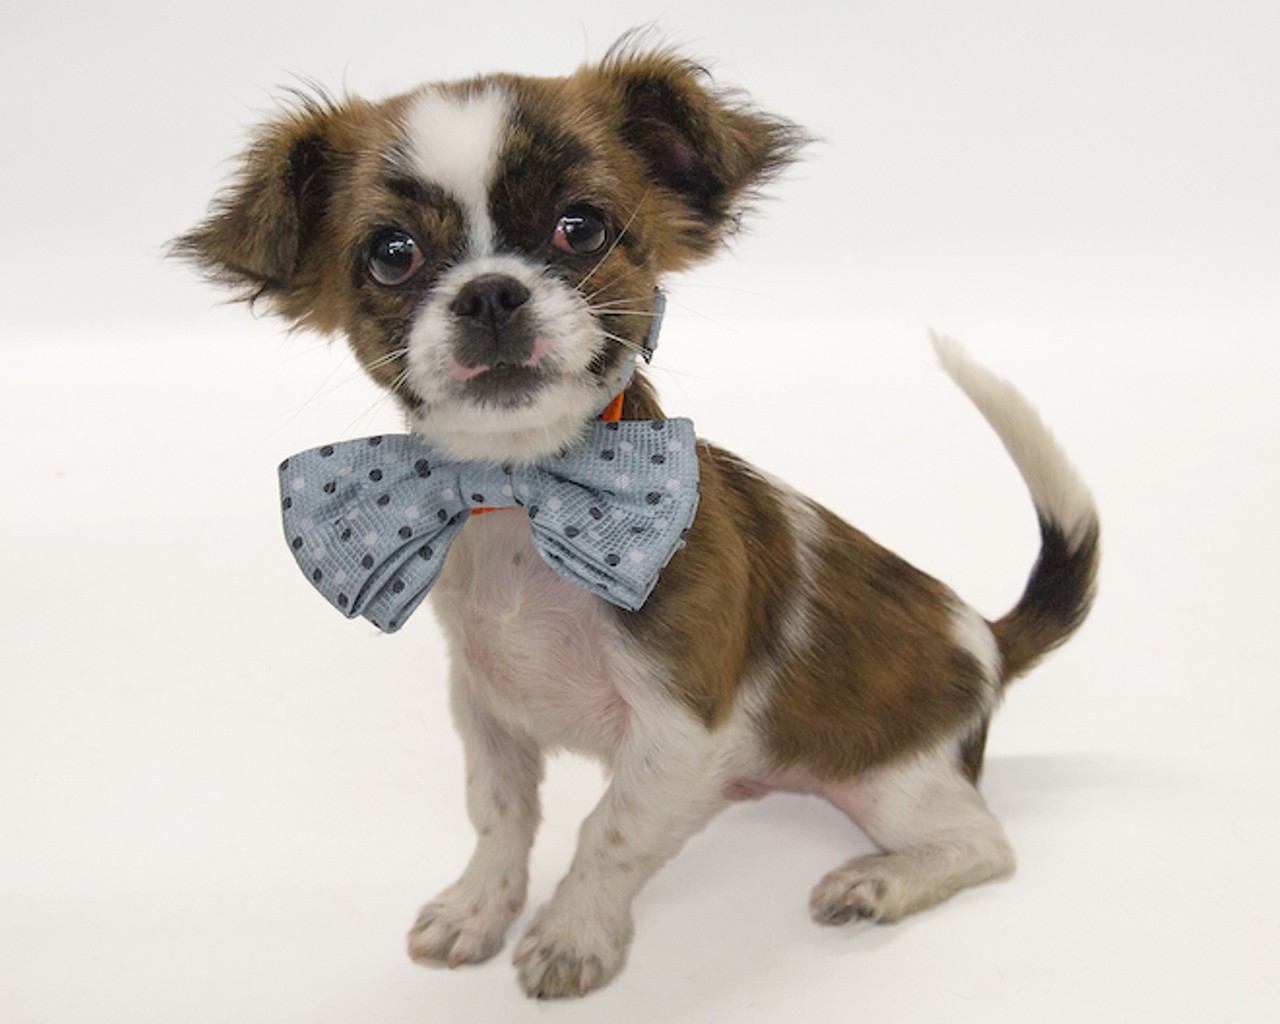 29 certified pre-owned pups looking for homes at Orange County Animal Services